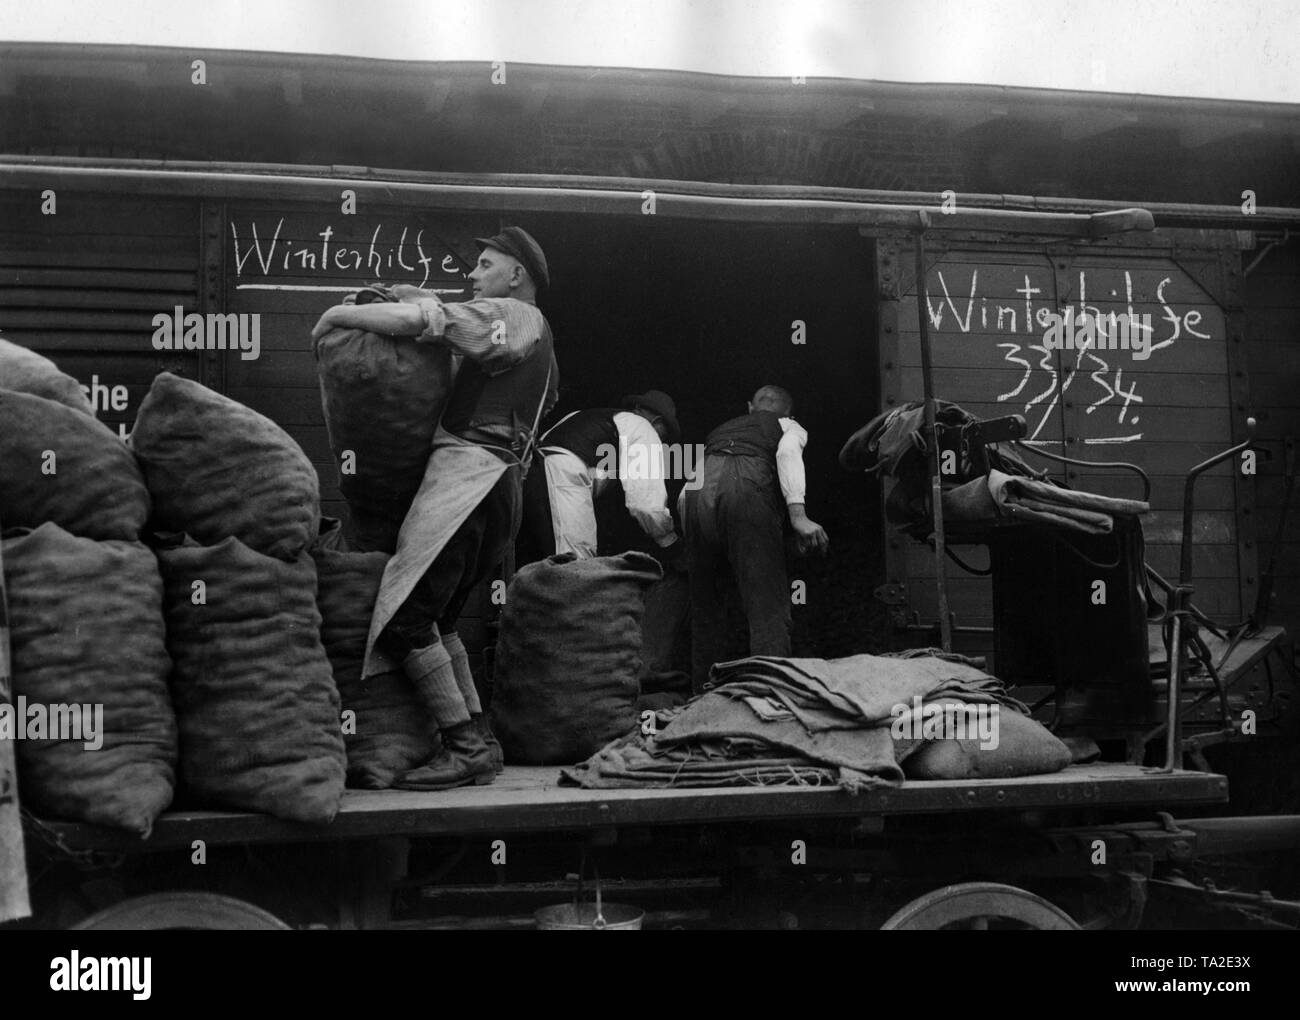 Workers unload potato bags from a train which the Winterhilfe had received as donation. Stock Photo